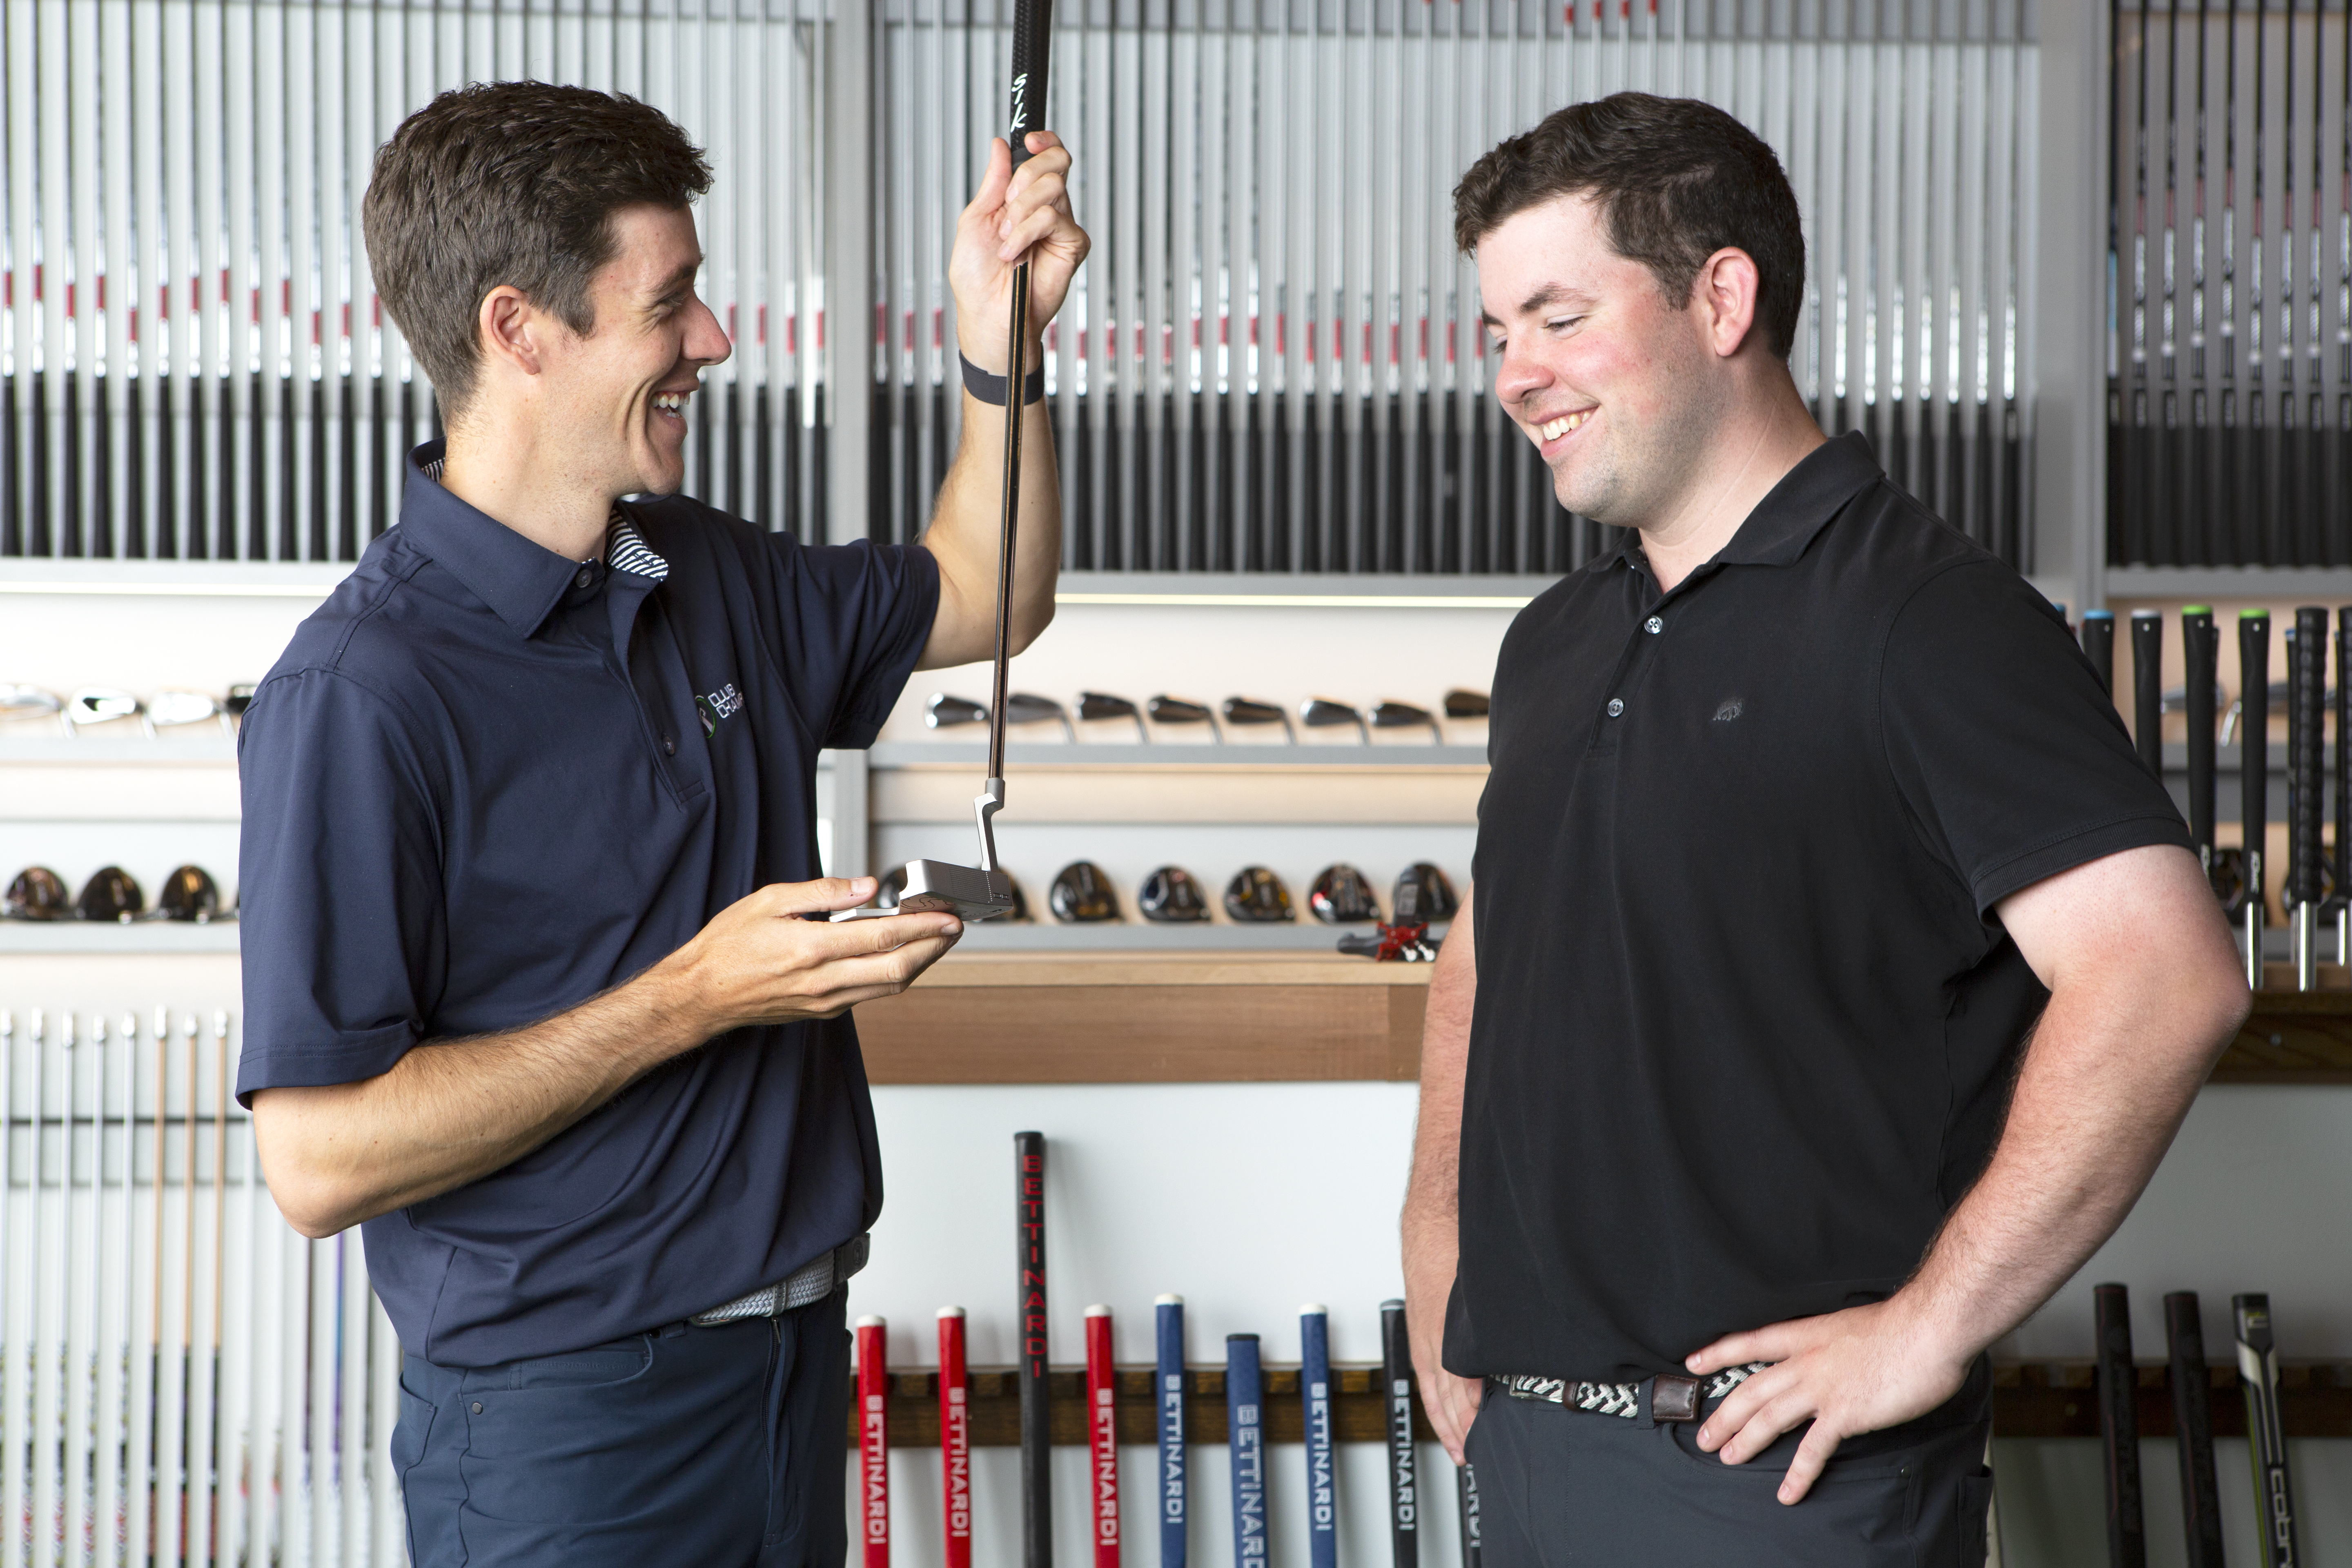 Who should be fitted for golf clubs?